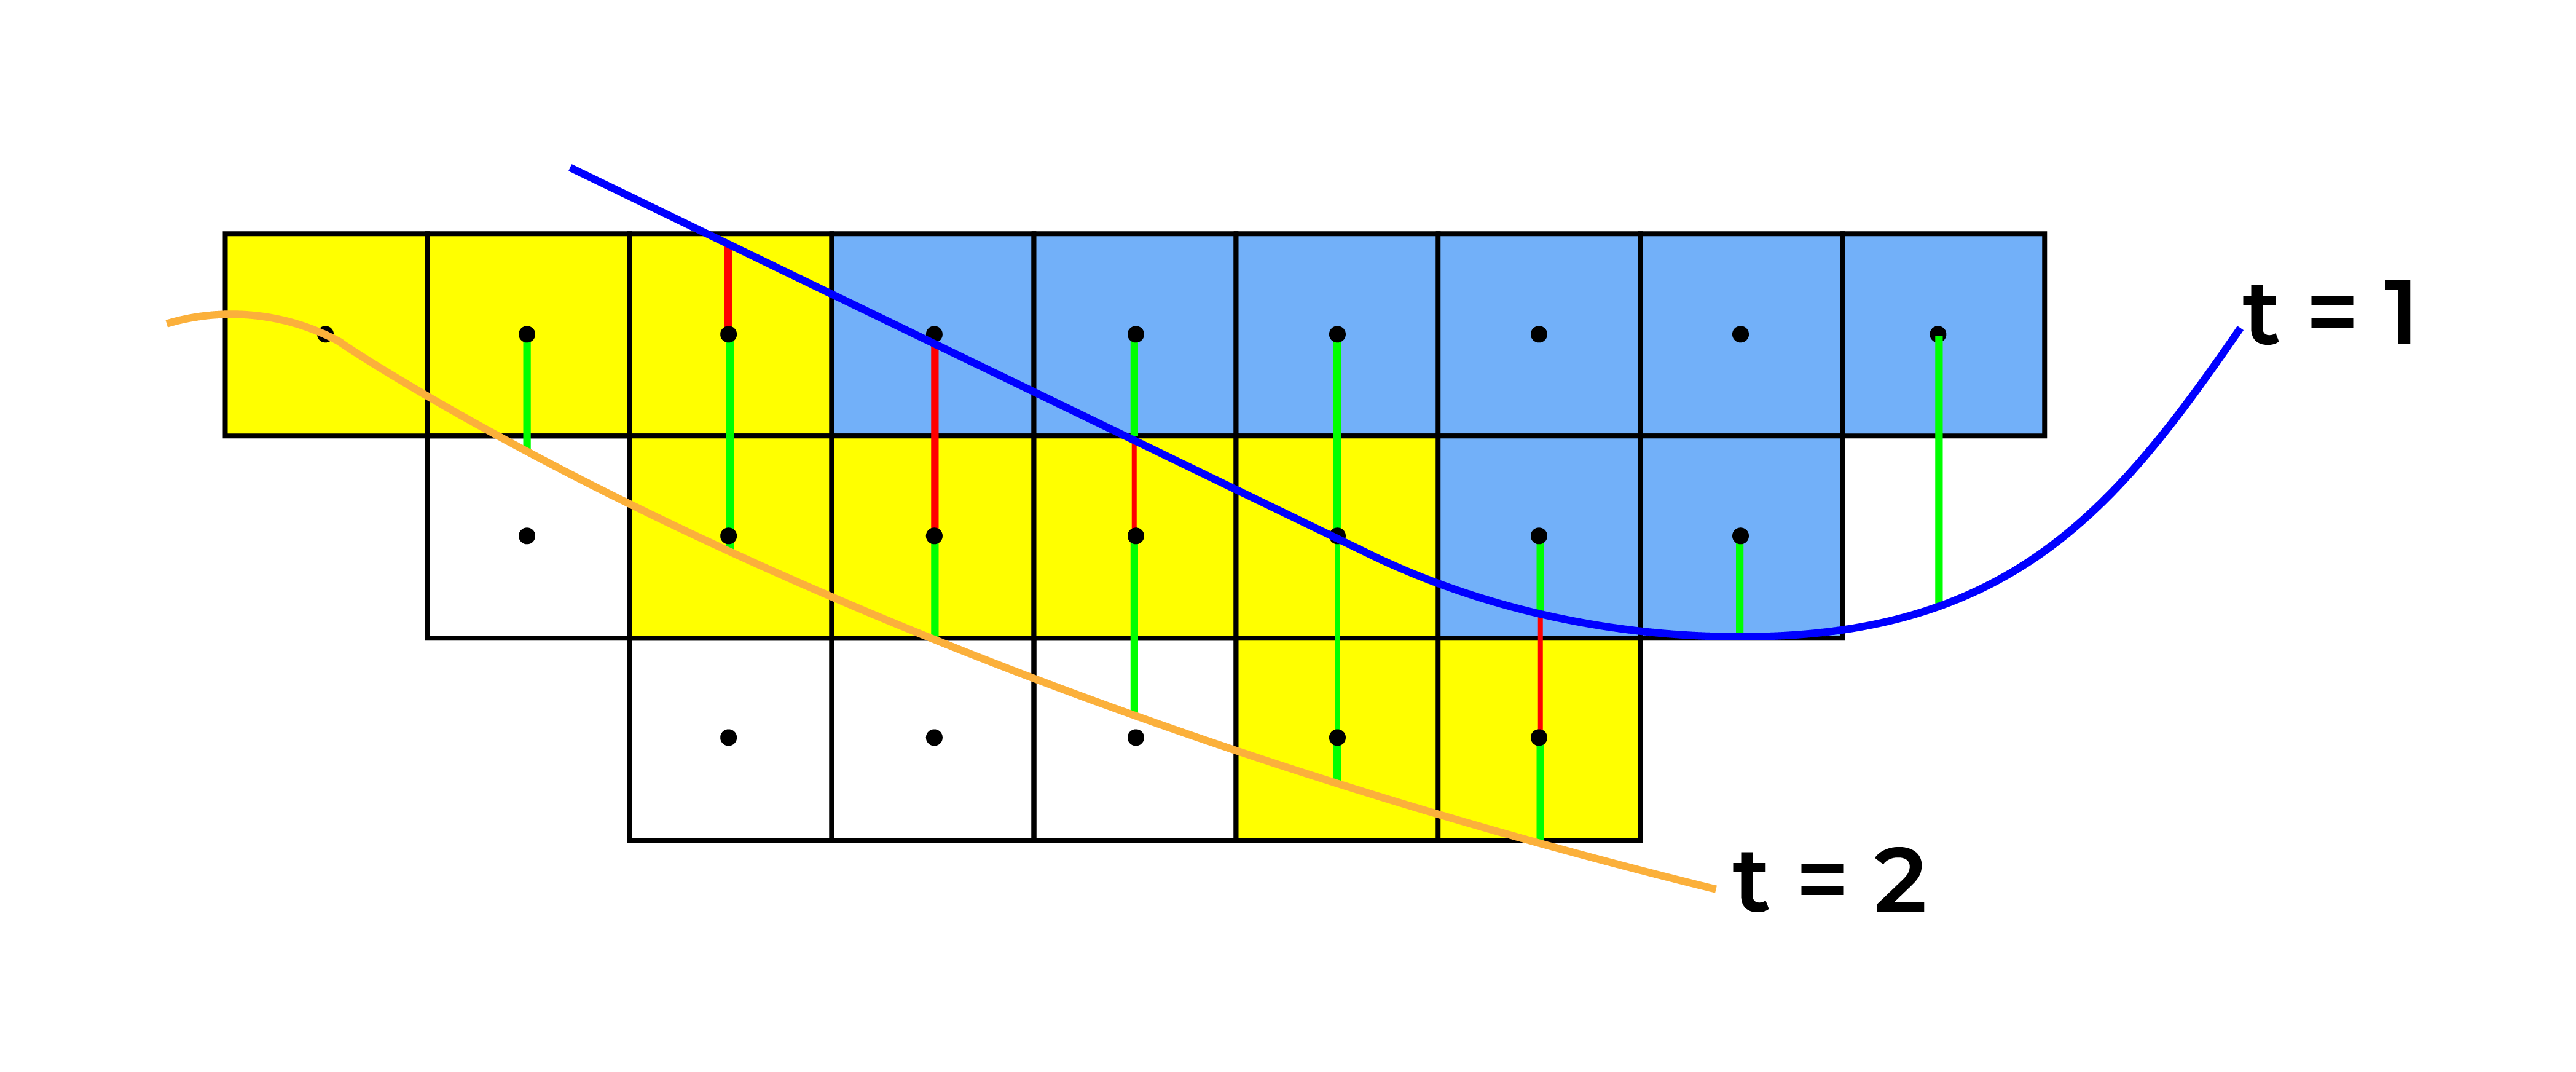 Figure 5: Distance between centroids above surfaces (green lines) and below surfaces (red lines) respecting constraints (6) and (7). Blue blocks are mined in period 1, while yellow blocks are mined in period 2.